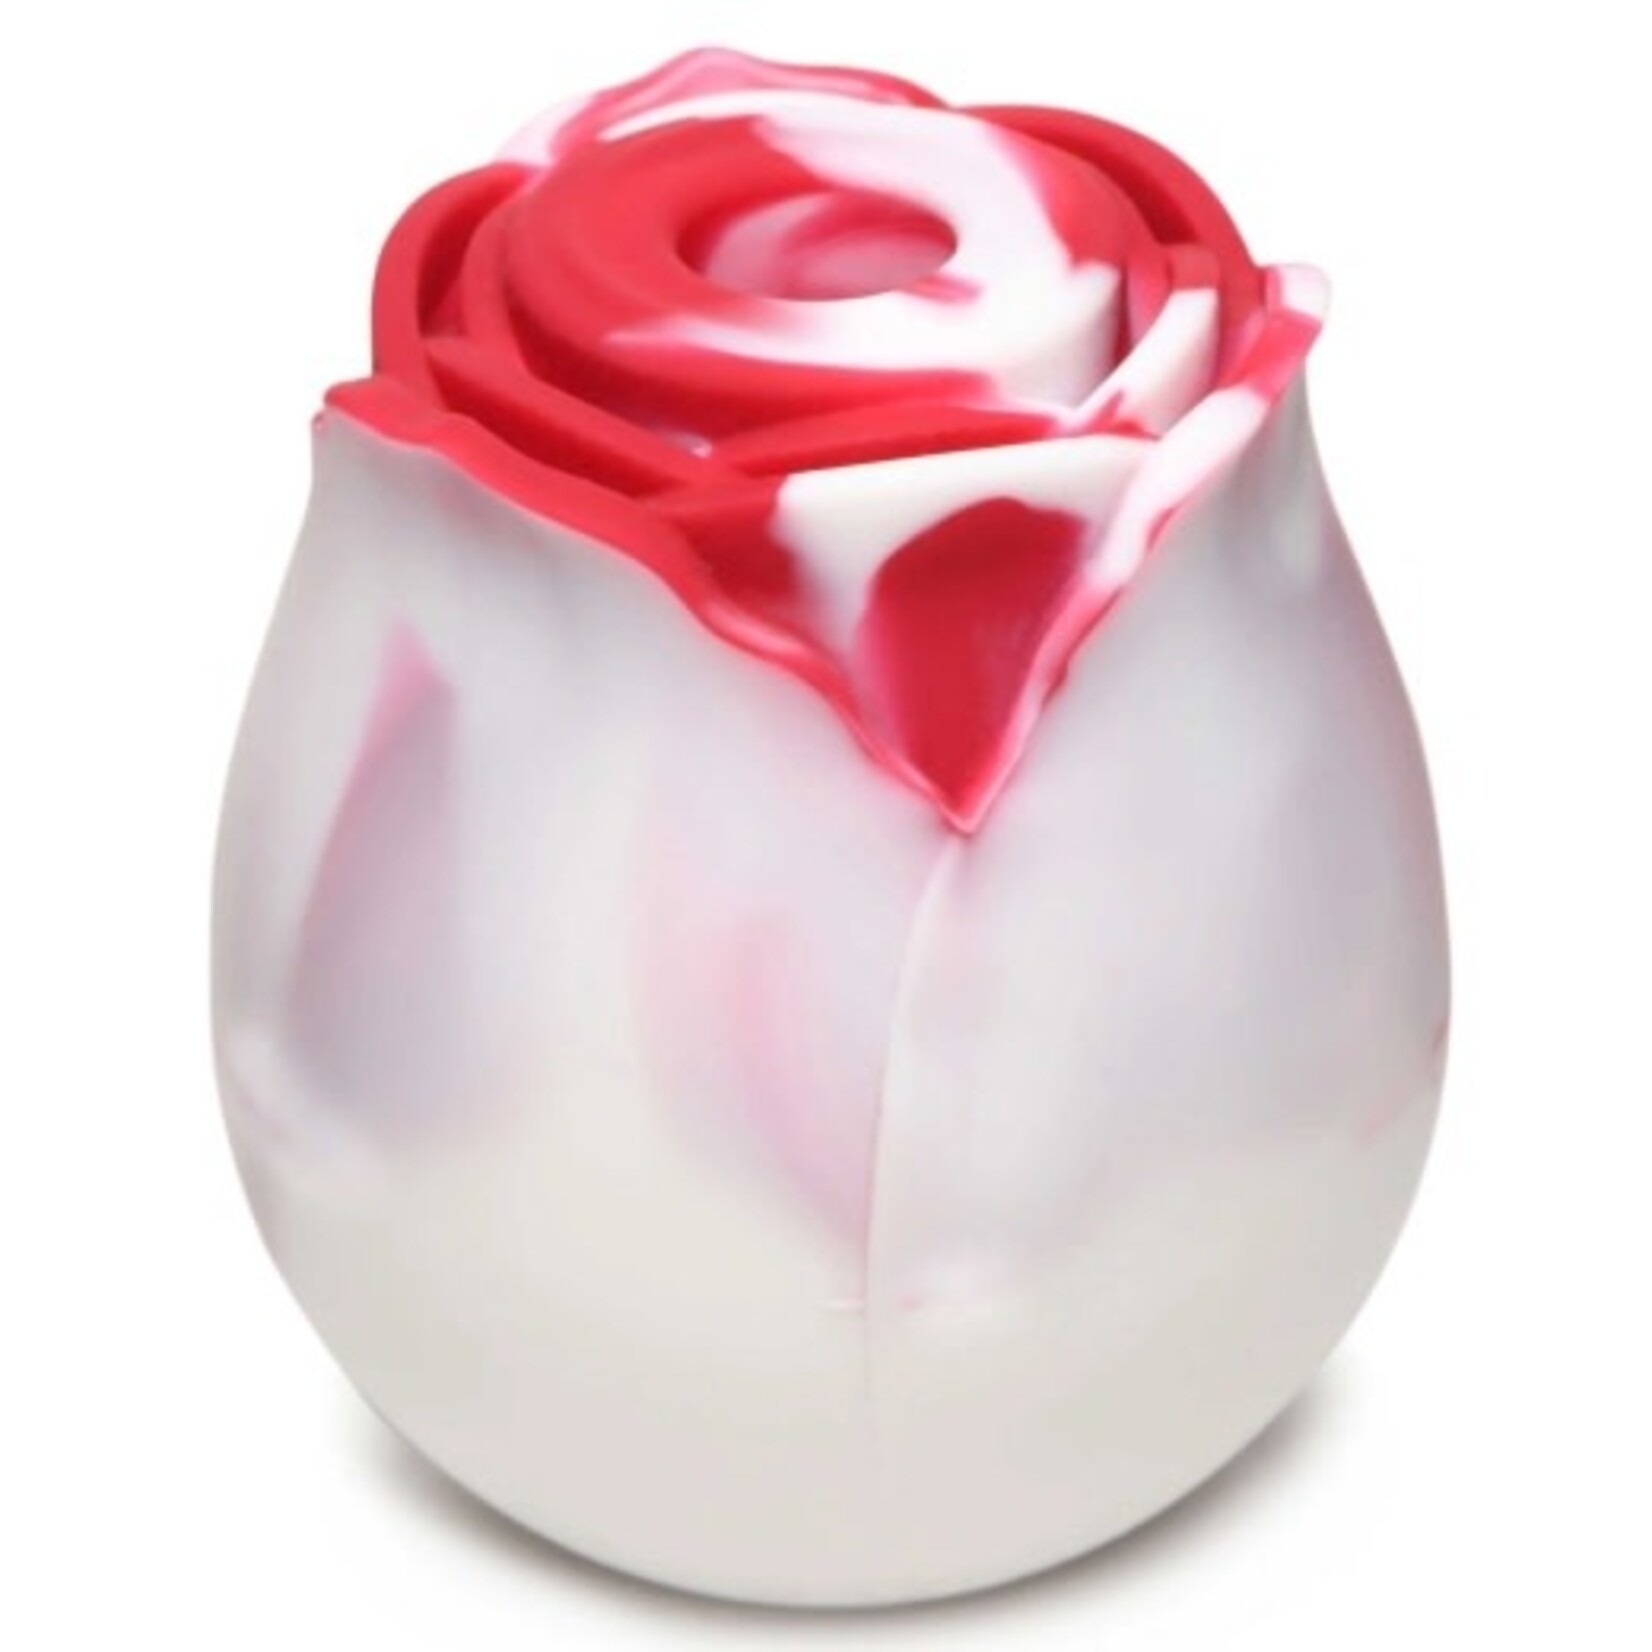 BLOOMGASM THE ROSE LOVER'S GIFT BOX - SWIRL